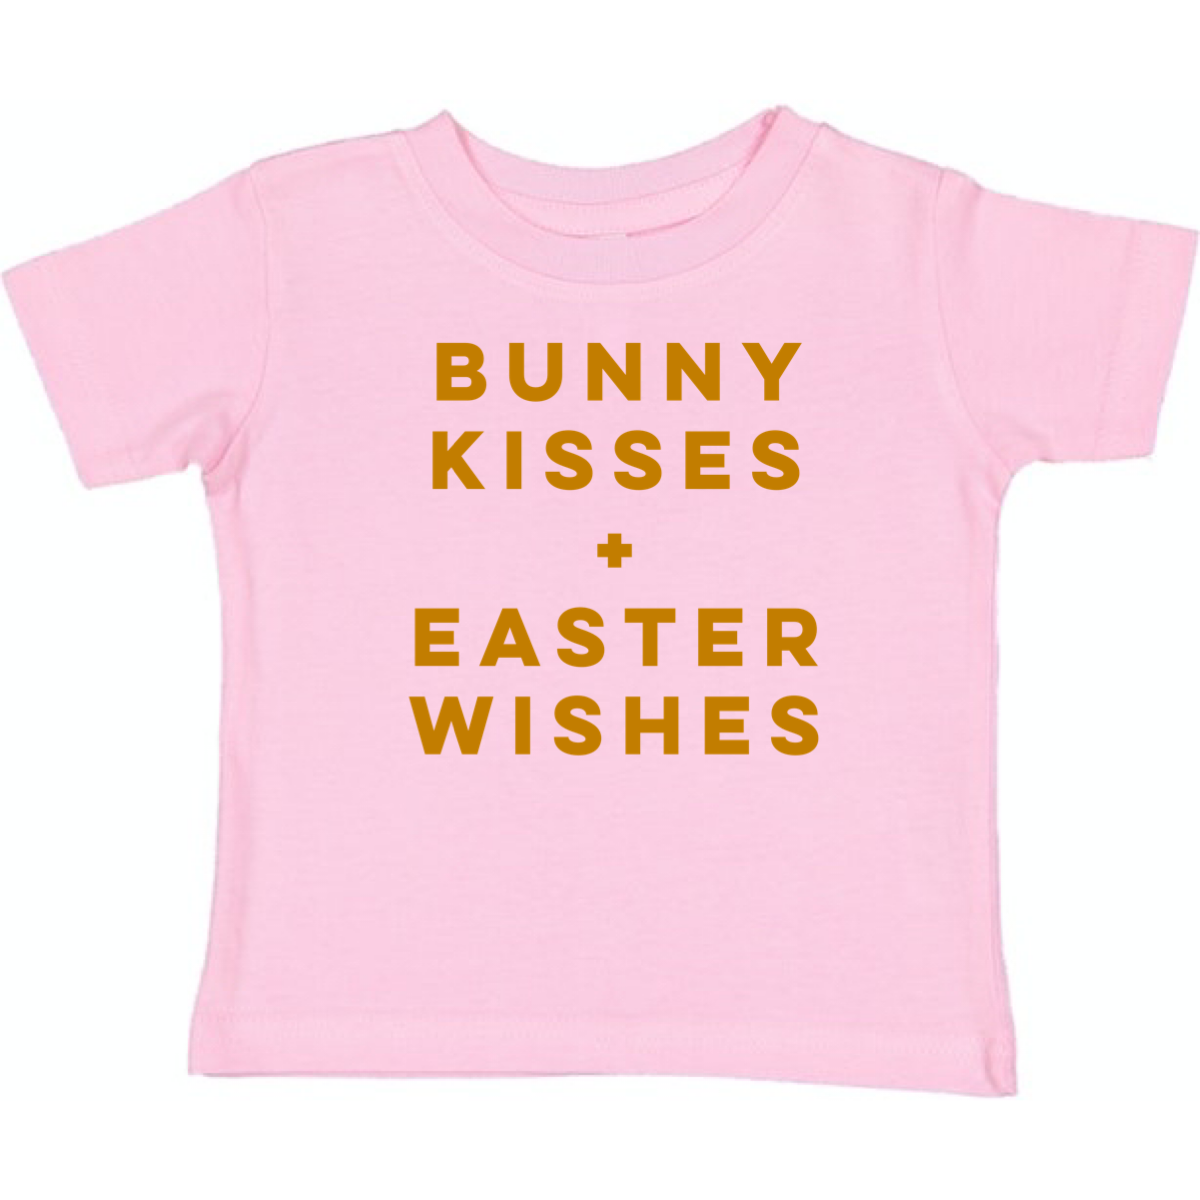 Bunny Kisses + Easter Wishes